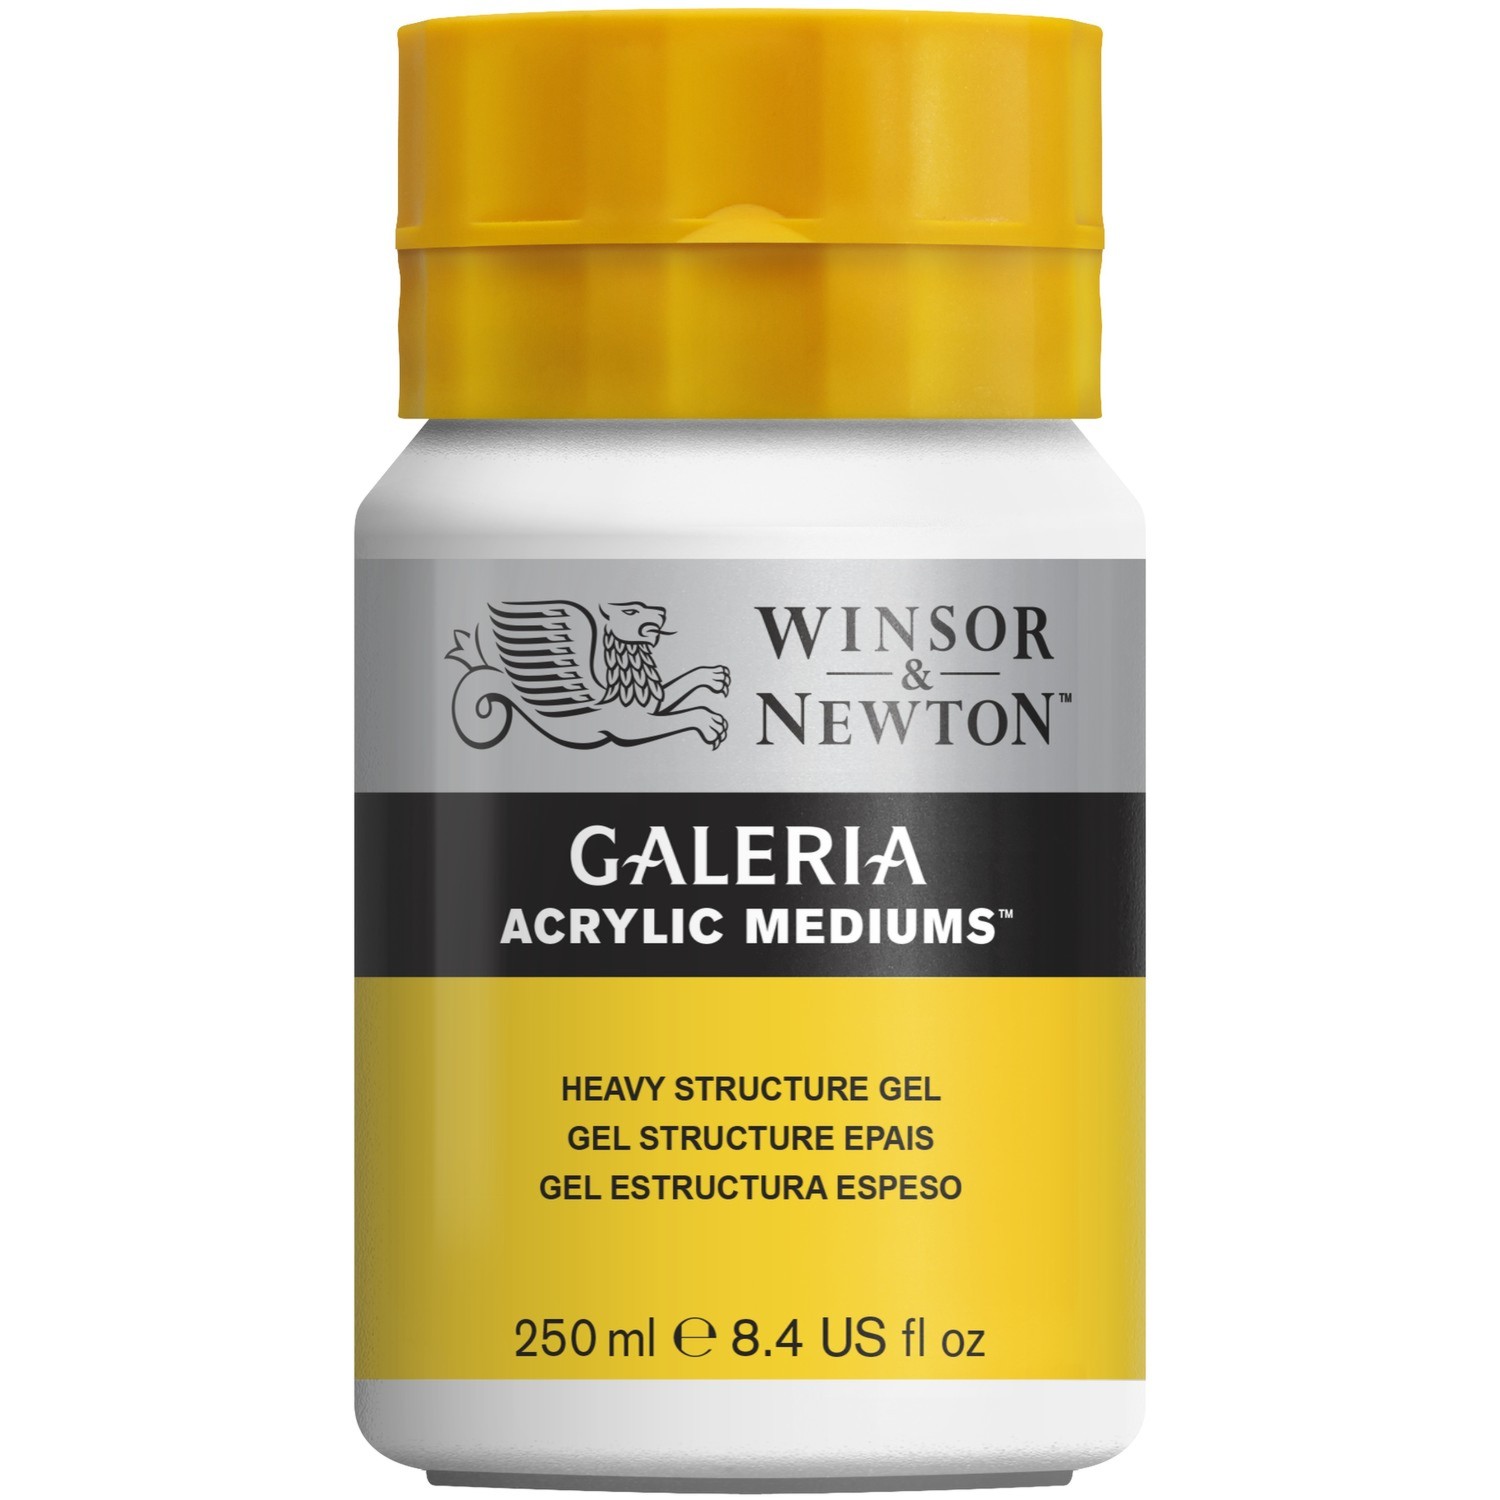 Winsor and Newton 250ml Galeria Acrylic Heavy Structure Gel Image